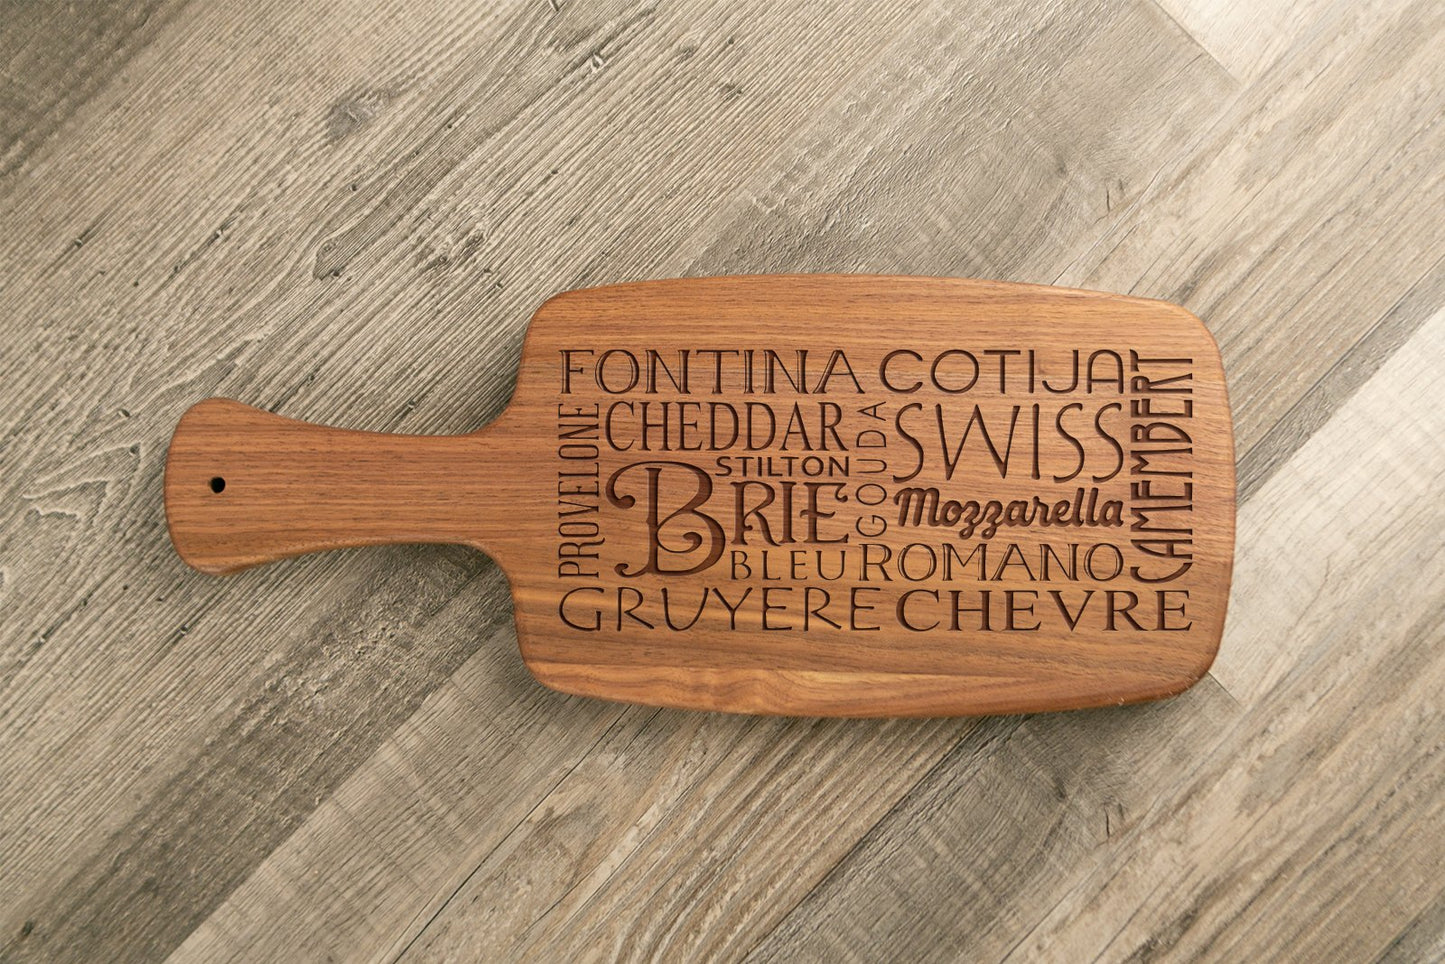 Walnut Cheese/Charcuterie Board - 14.5"x6" Paddle Shape - Etchified-Etchified-1068